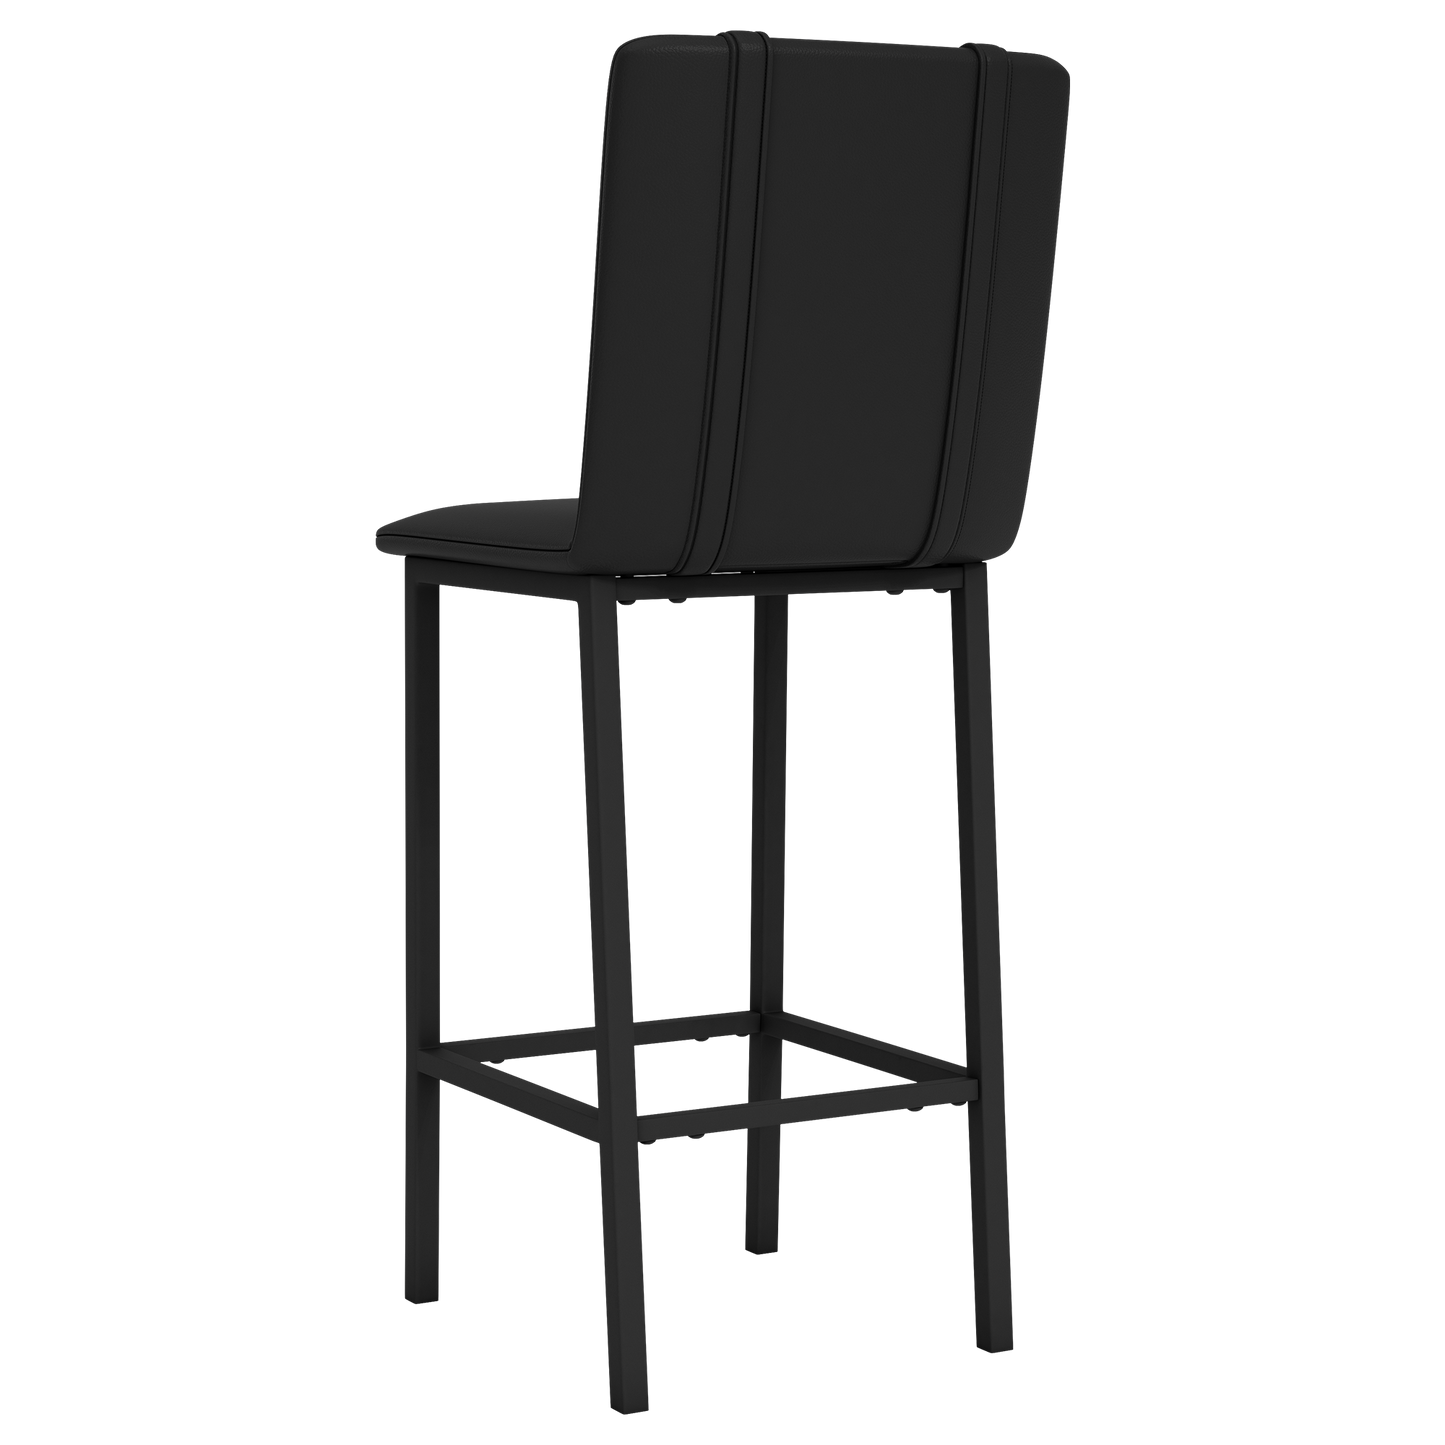 Bar Stool 500 with Tennessee Titans Helmet Logo Set of 2